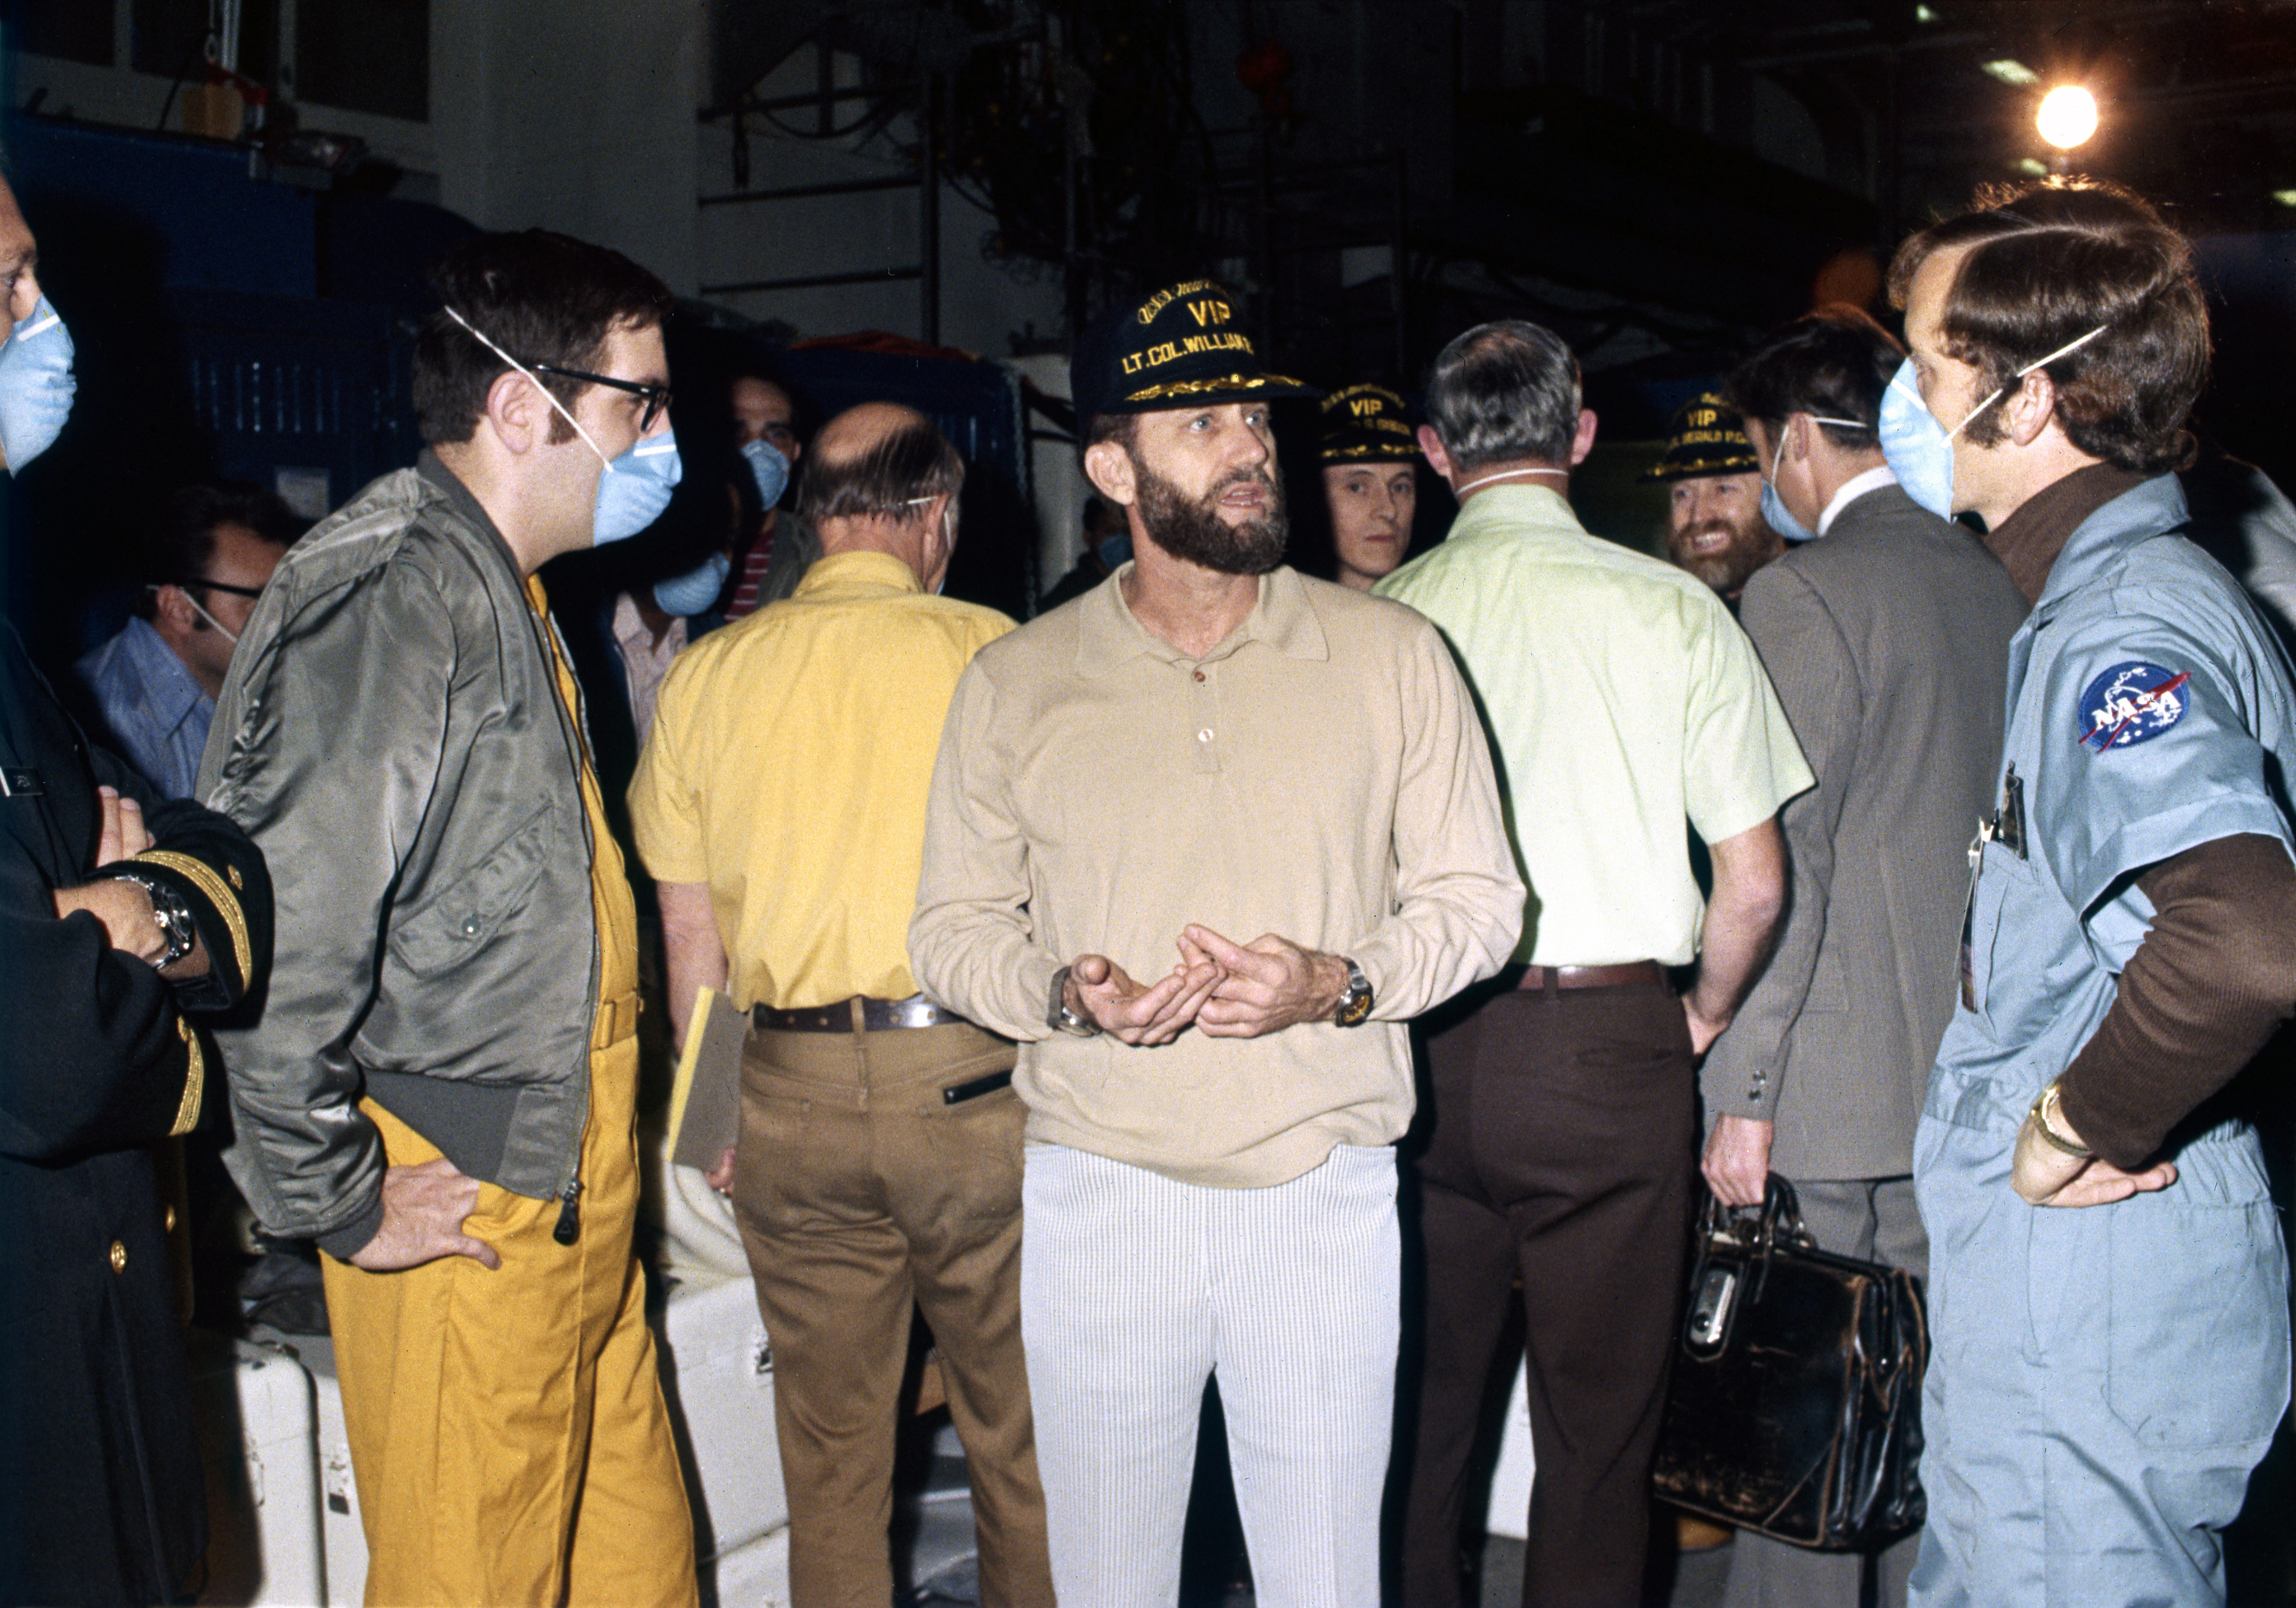 Skylab 4 astronauts mingle with some of the crew aboard the New Orleans